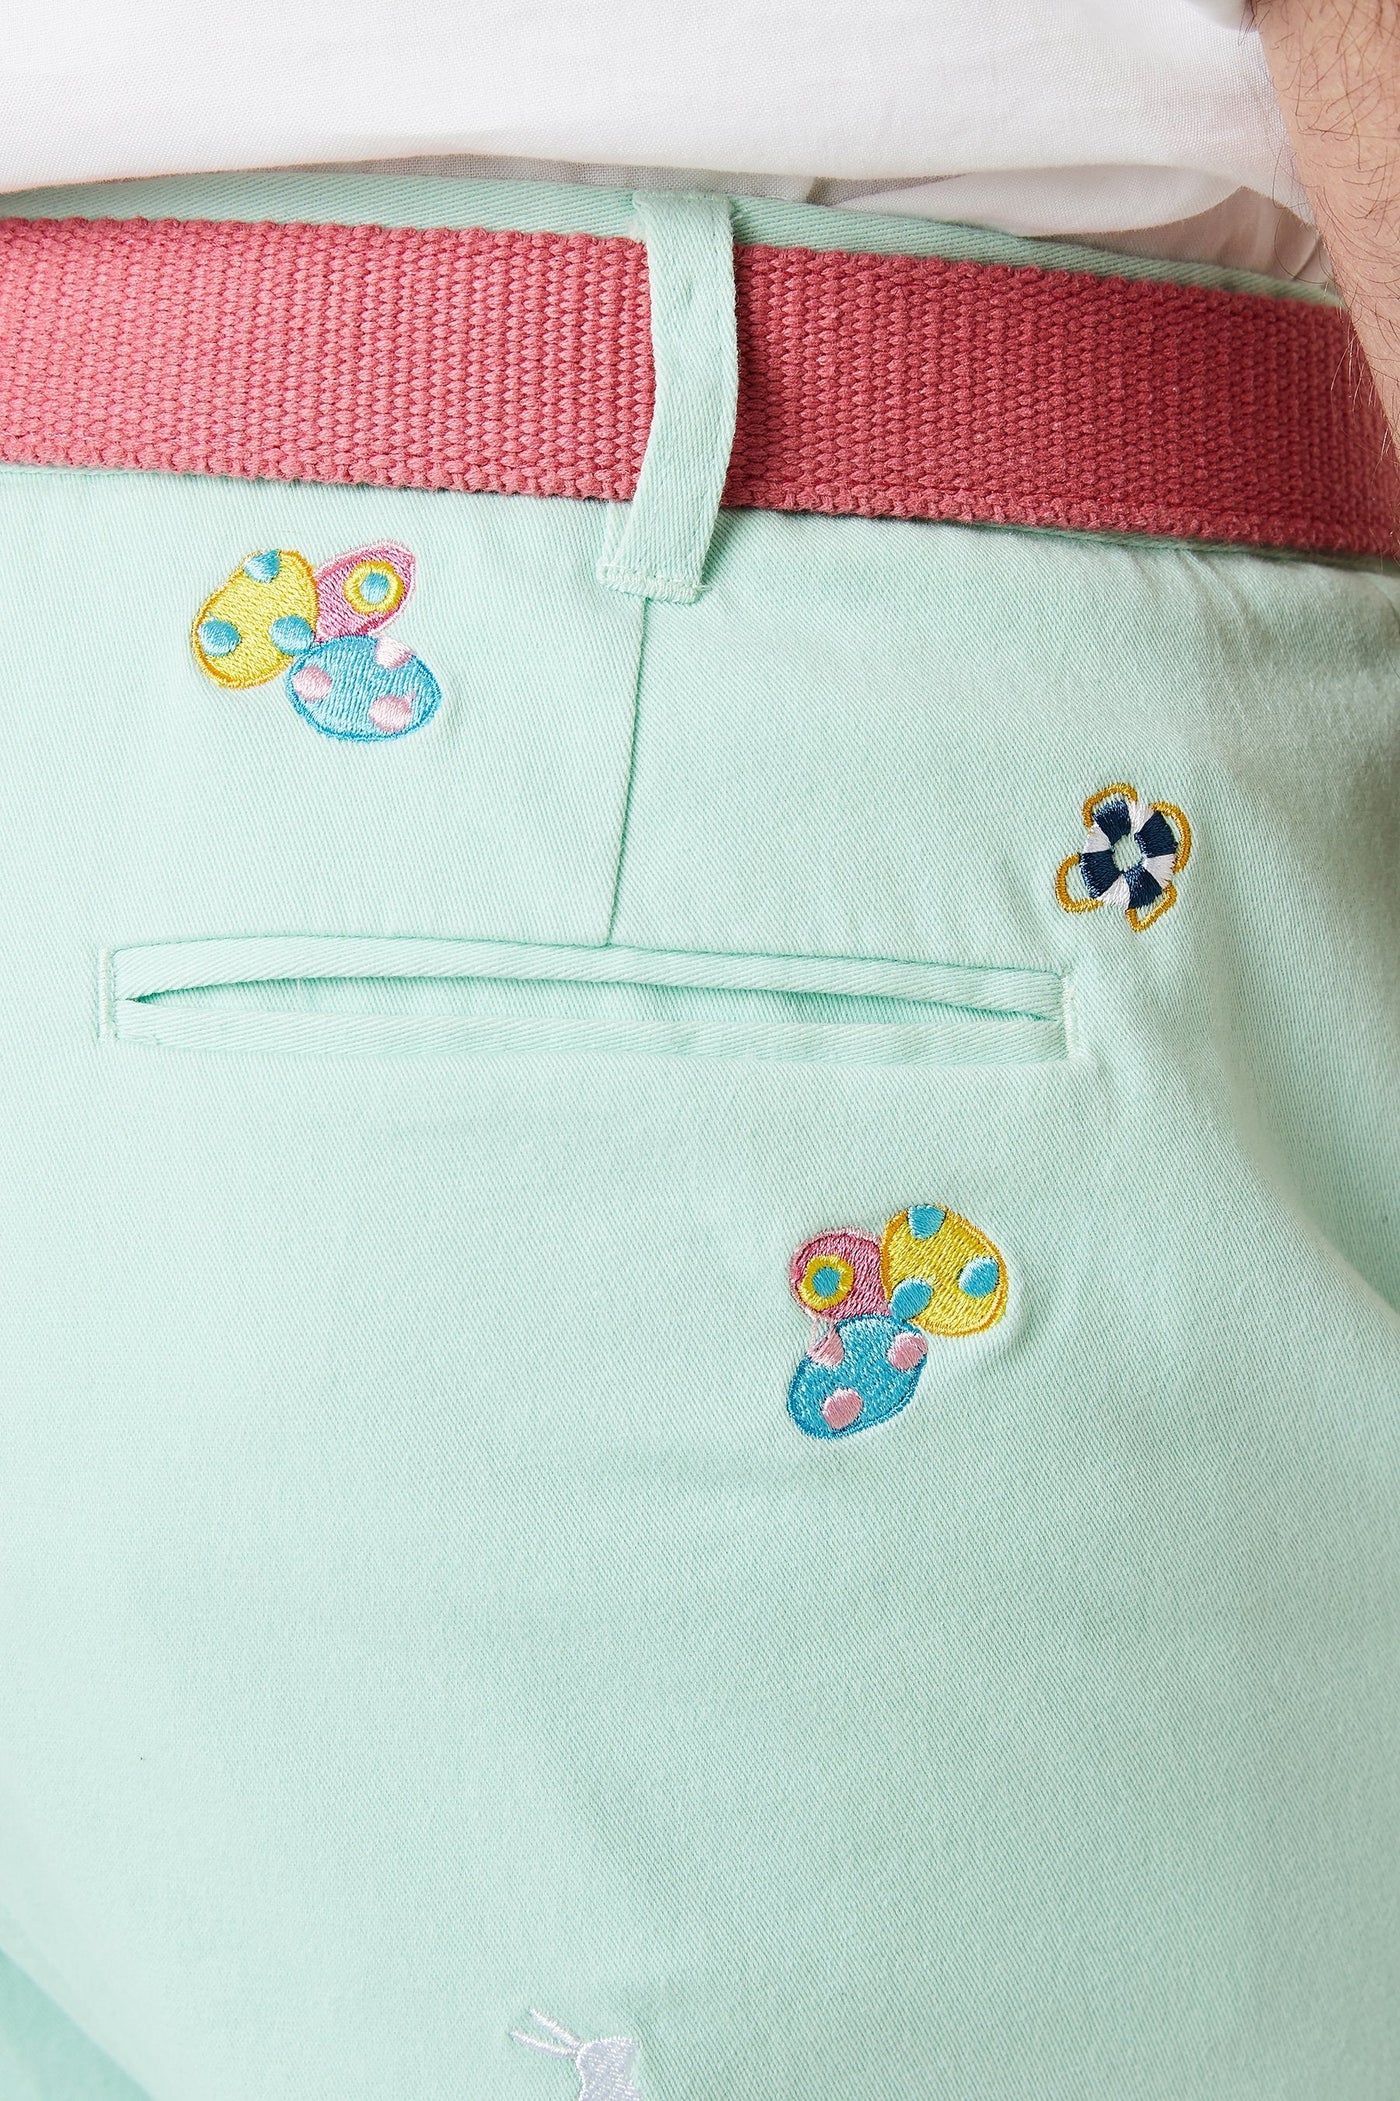 Harbor Pant Stretch Twill Mint with Easter Eggs and Bunny - Castaway Nantucket Island